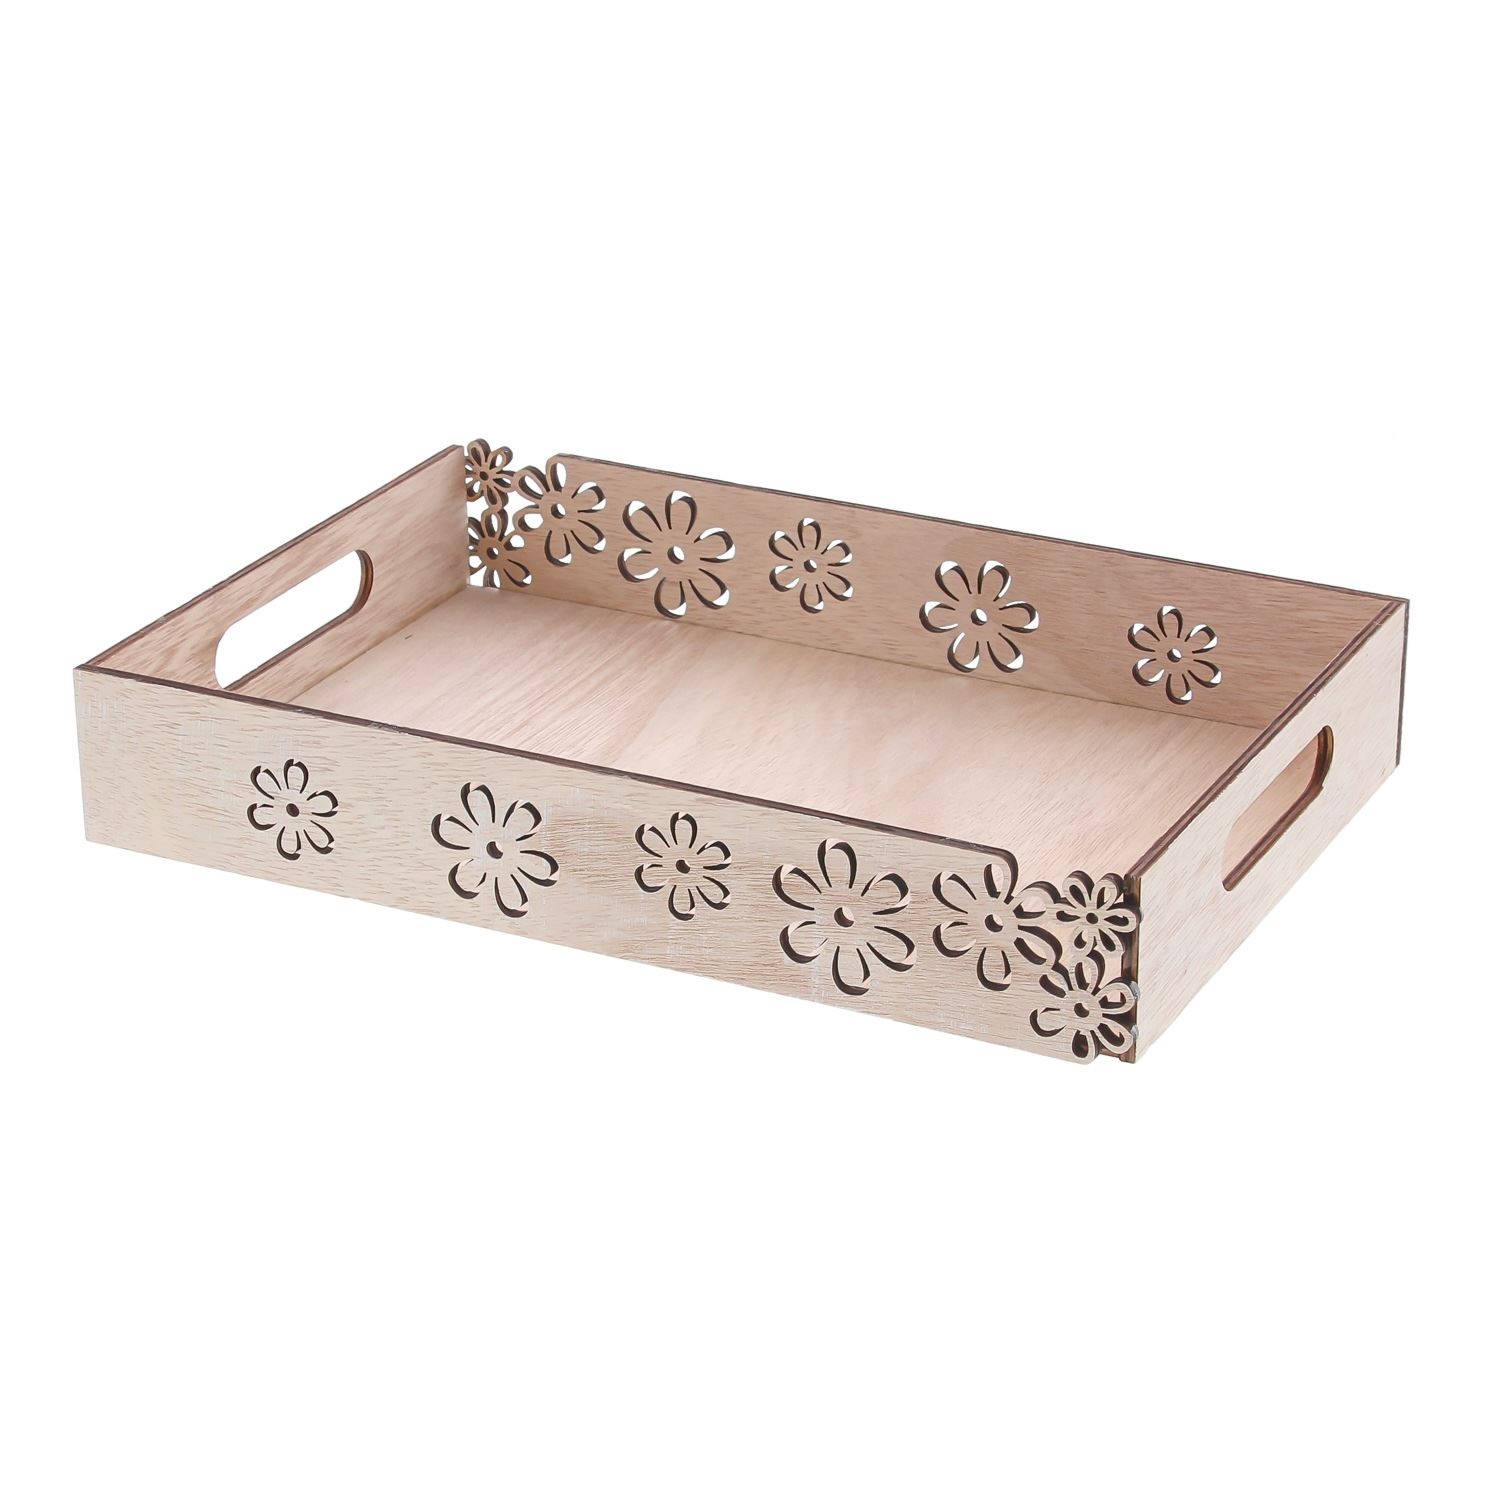 Rectangular tray with floral pattern - 300*200*50mm - 4 pieces